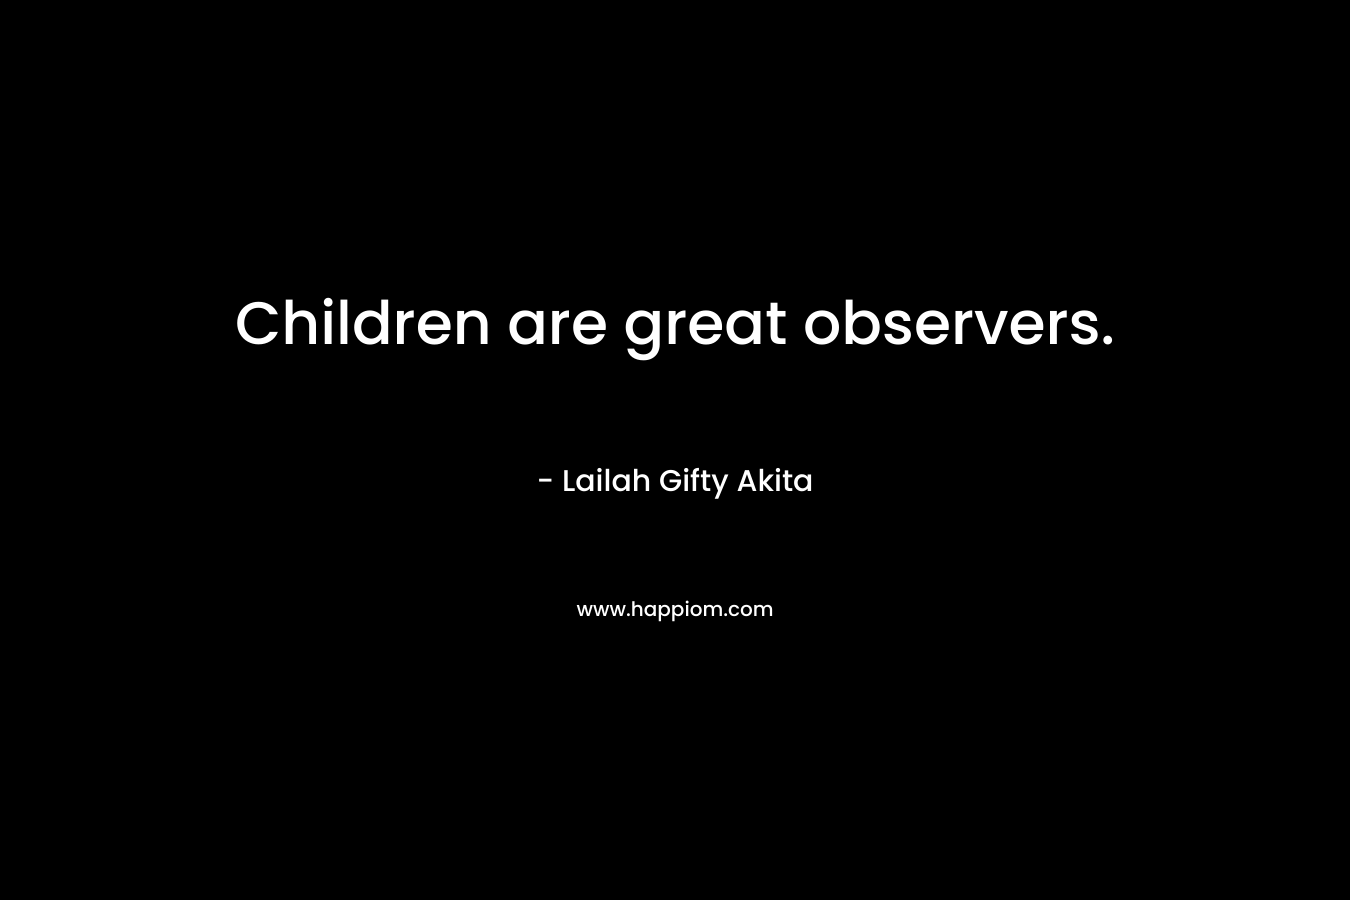 Children are great observers. – Lailah Gifty Akita